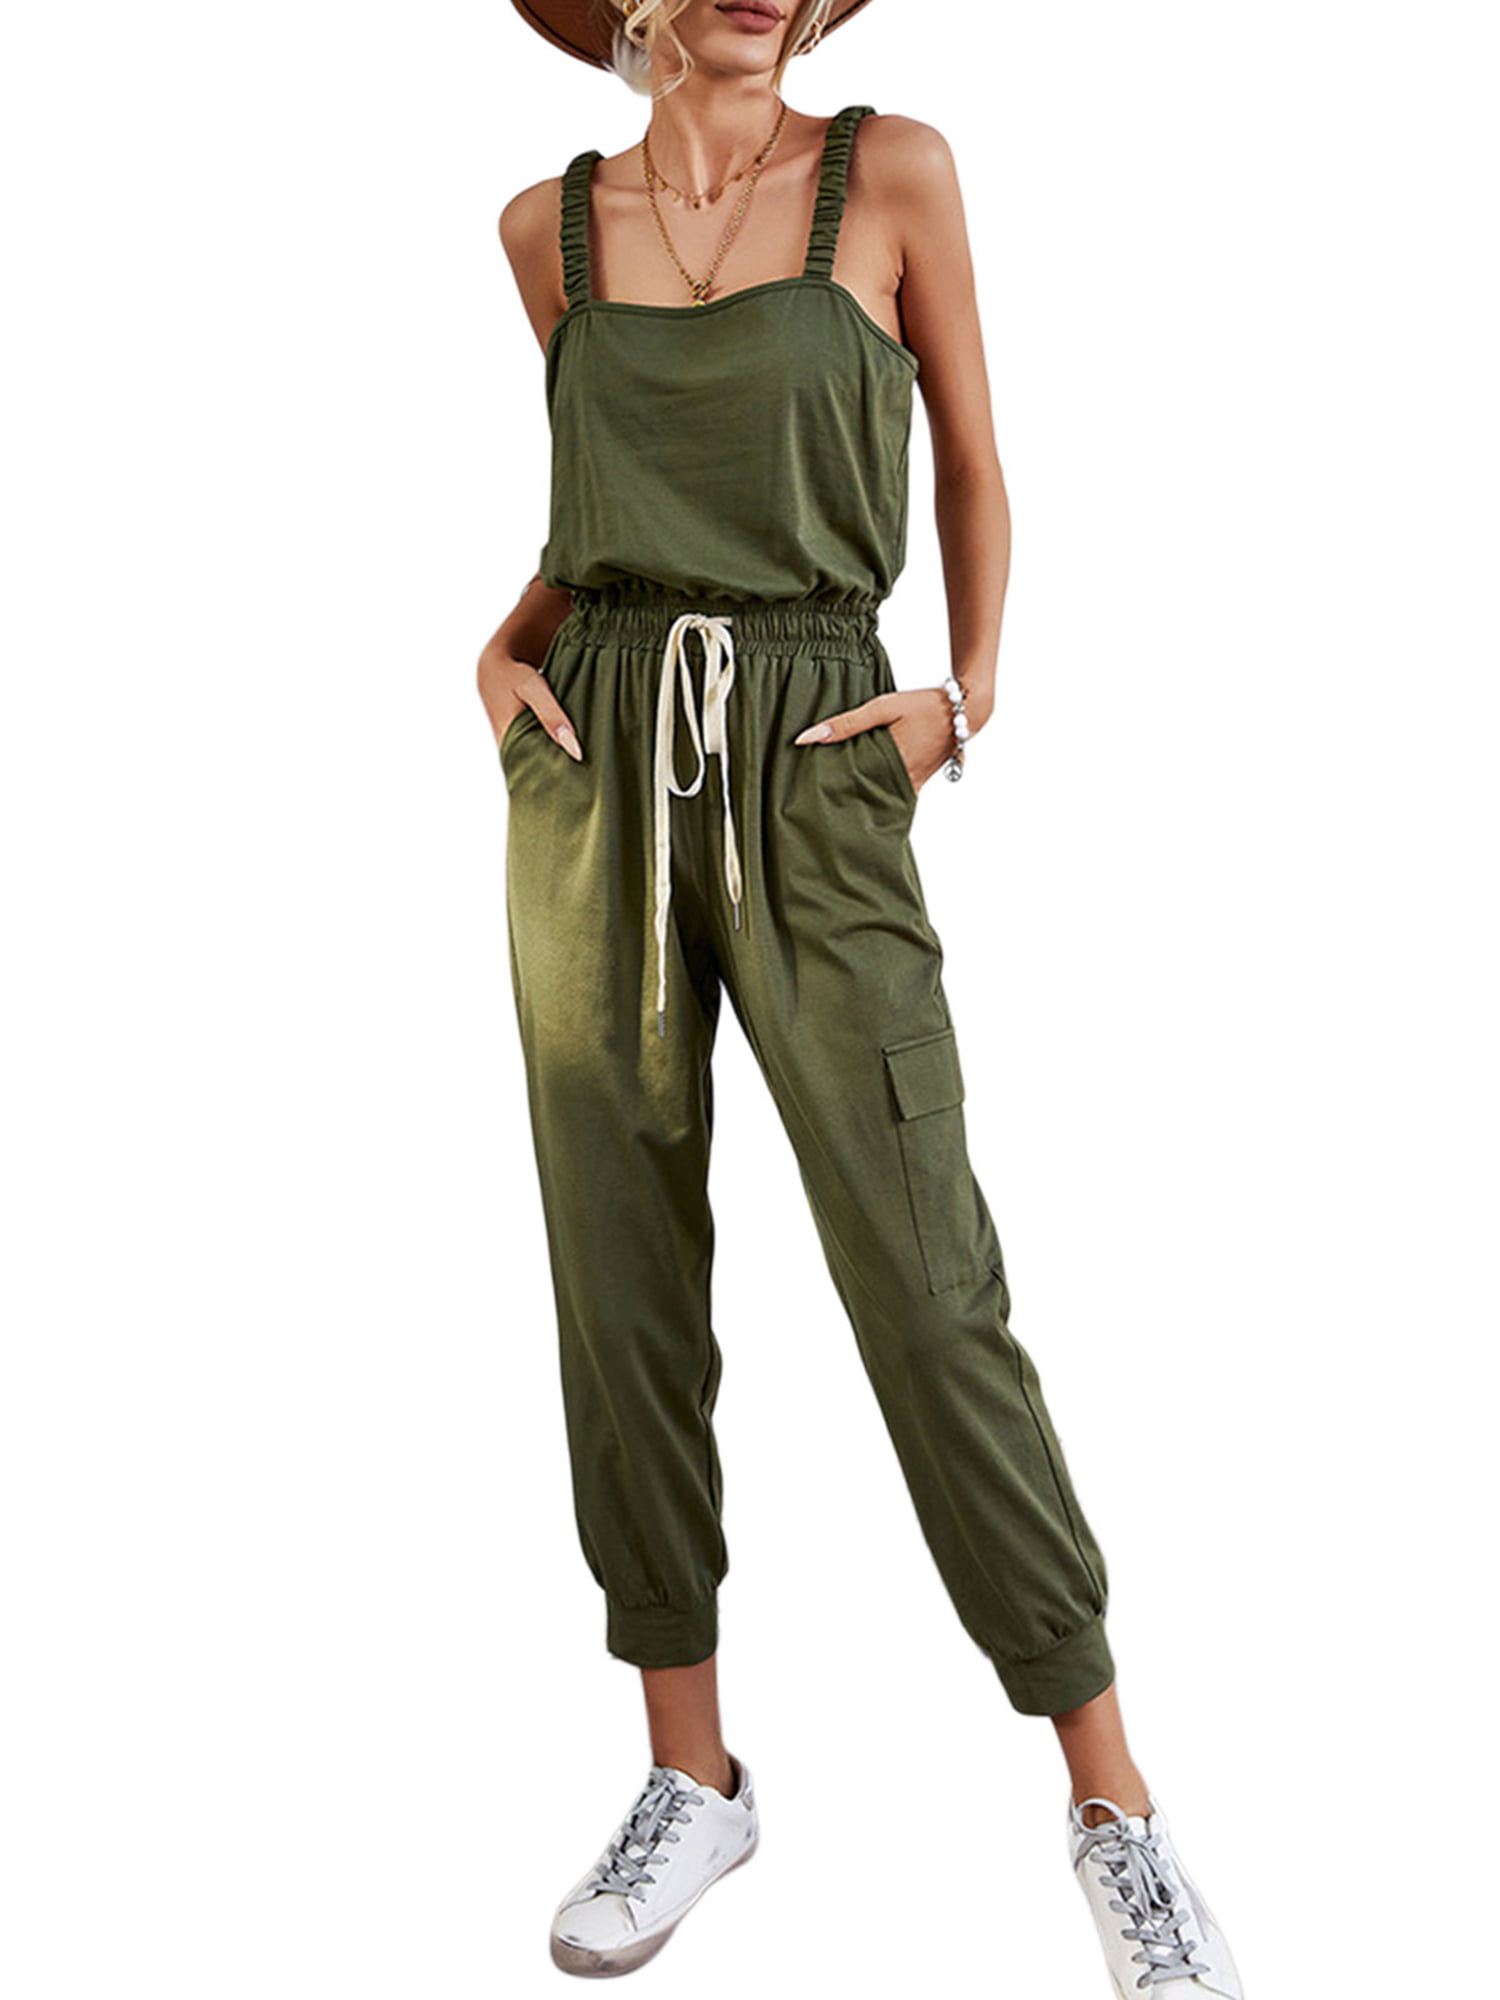 http://dwibn83ulx13j.cloudfron Women Casual O-Neck Sleeveless Solid Pocket Loose Jumpsuit Overalls